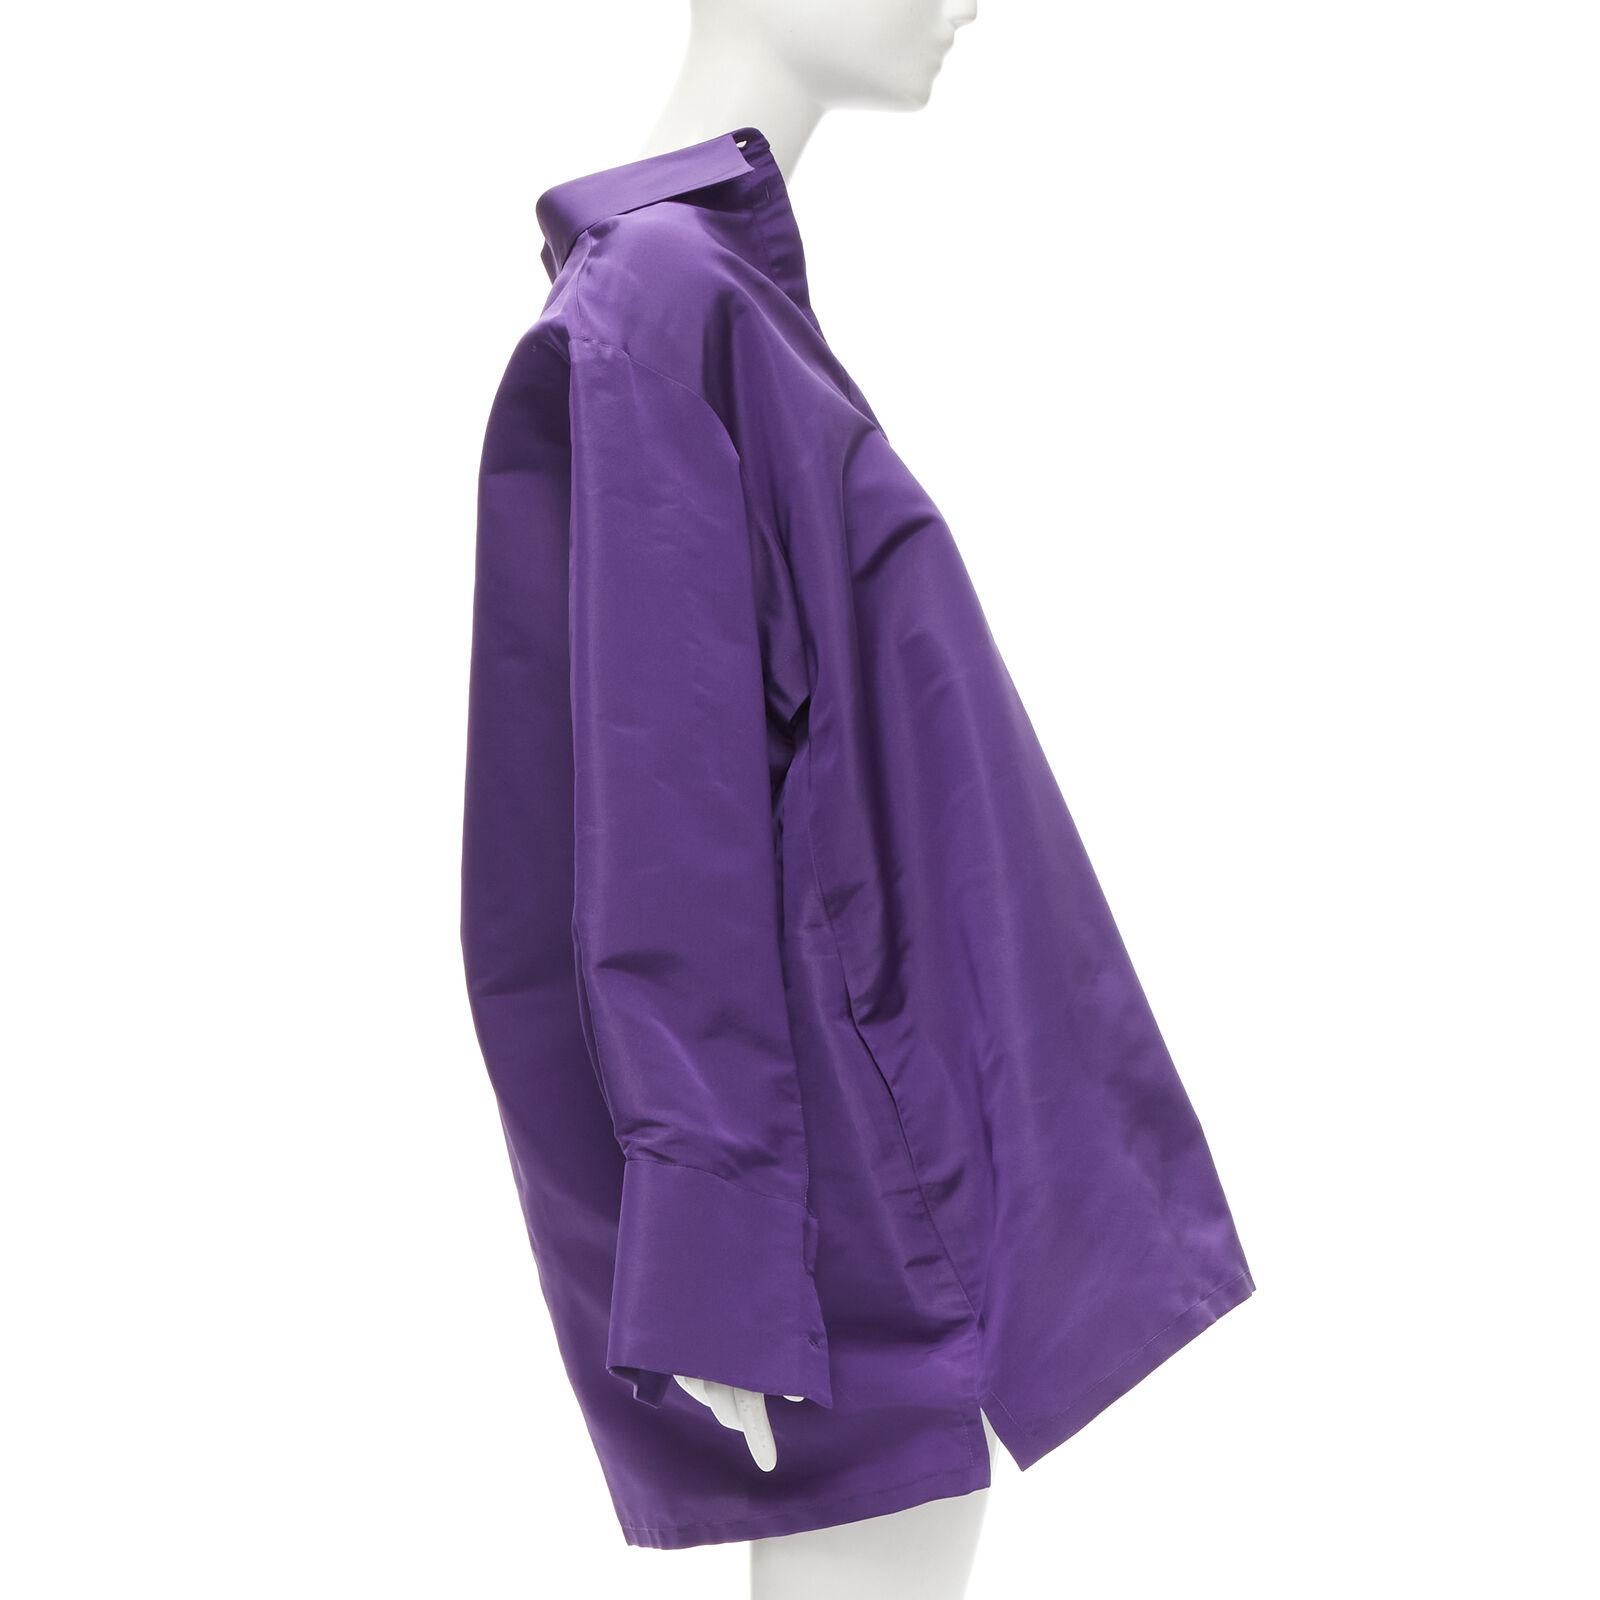 VALENTINO 2022 Runway purple silk taffeta 3D cut oversized tunic shirt IT38 XS
Reference: AAWC/A00264
Brand: Valentino
Designer: Pier Paolo Piccioli
Collection: 2022 - Runway
Material: 100% Silk
Color: Purple
Pattern: Solid
Closure: Button
Made in: